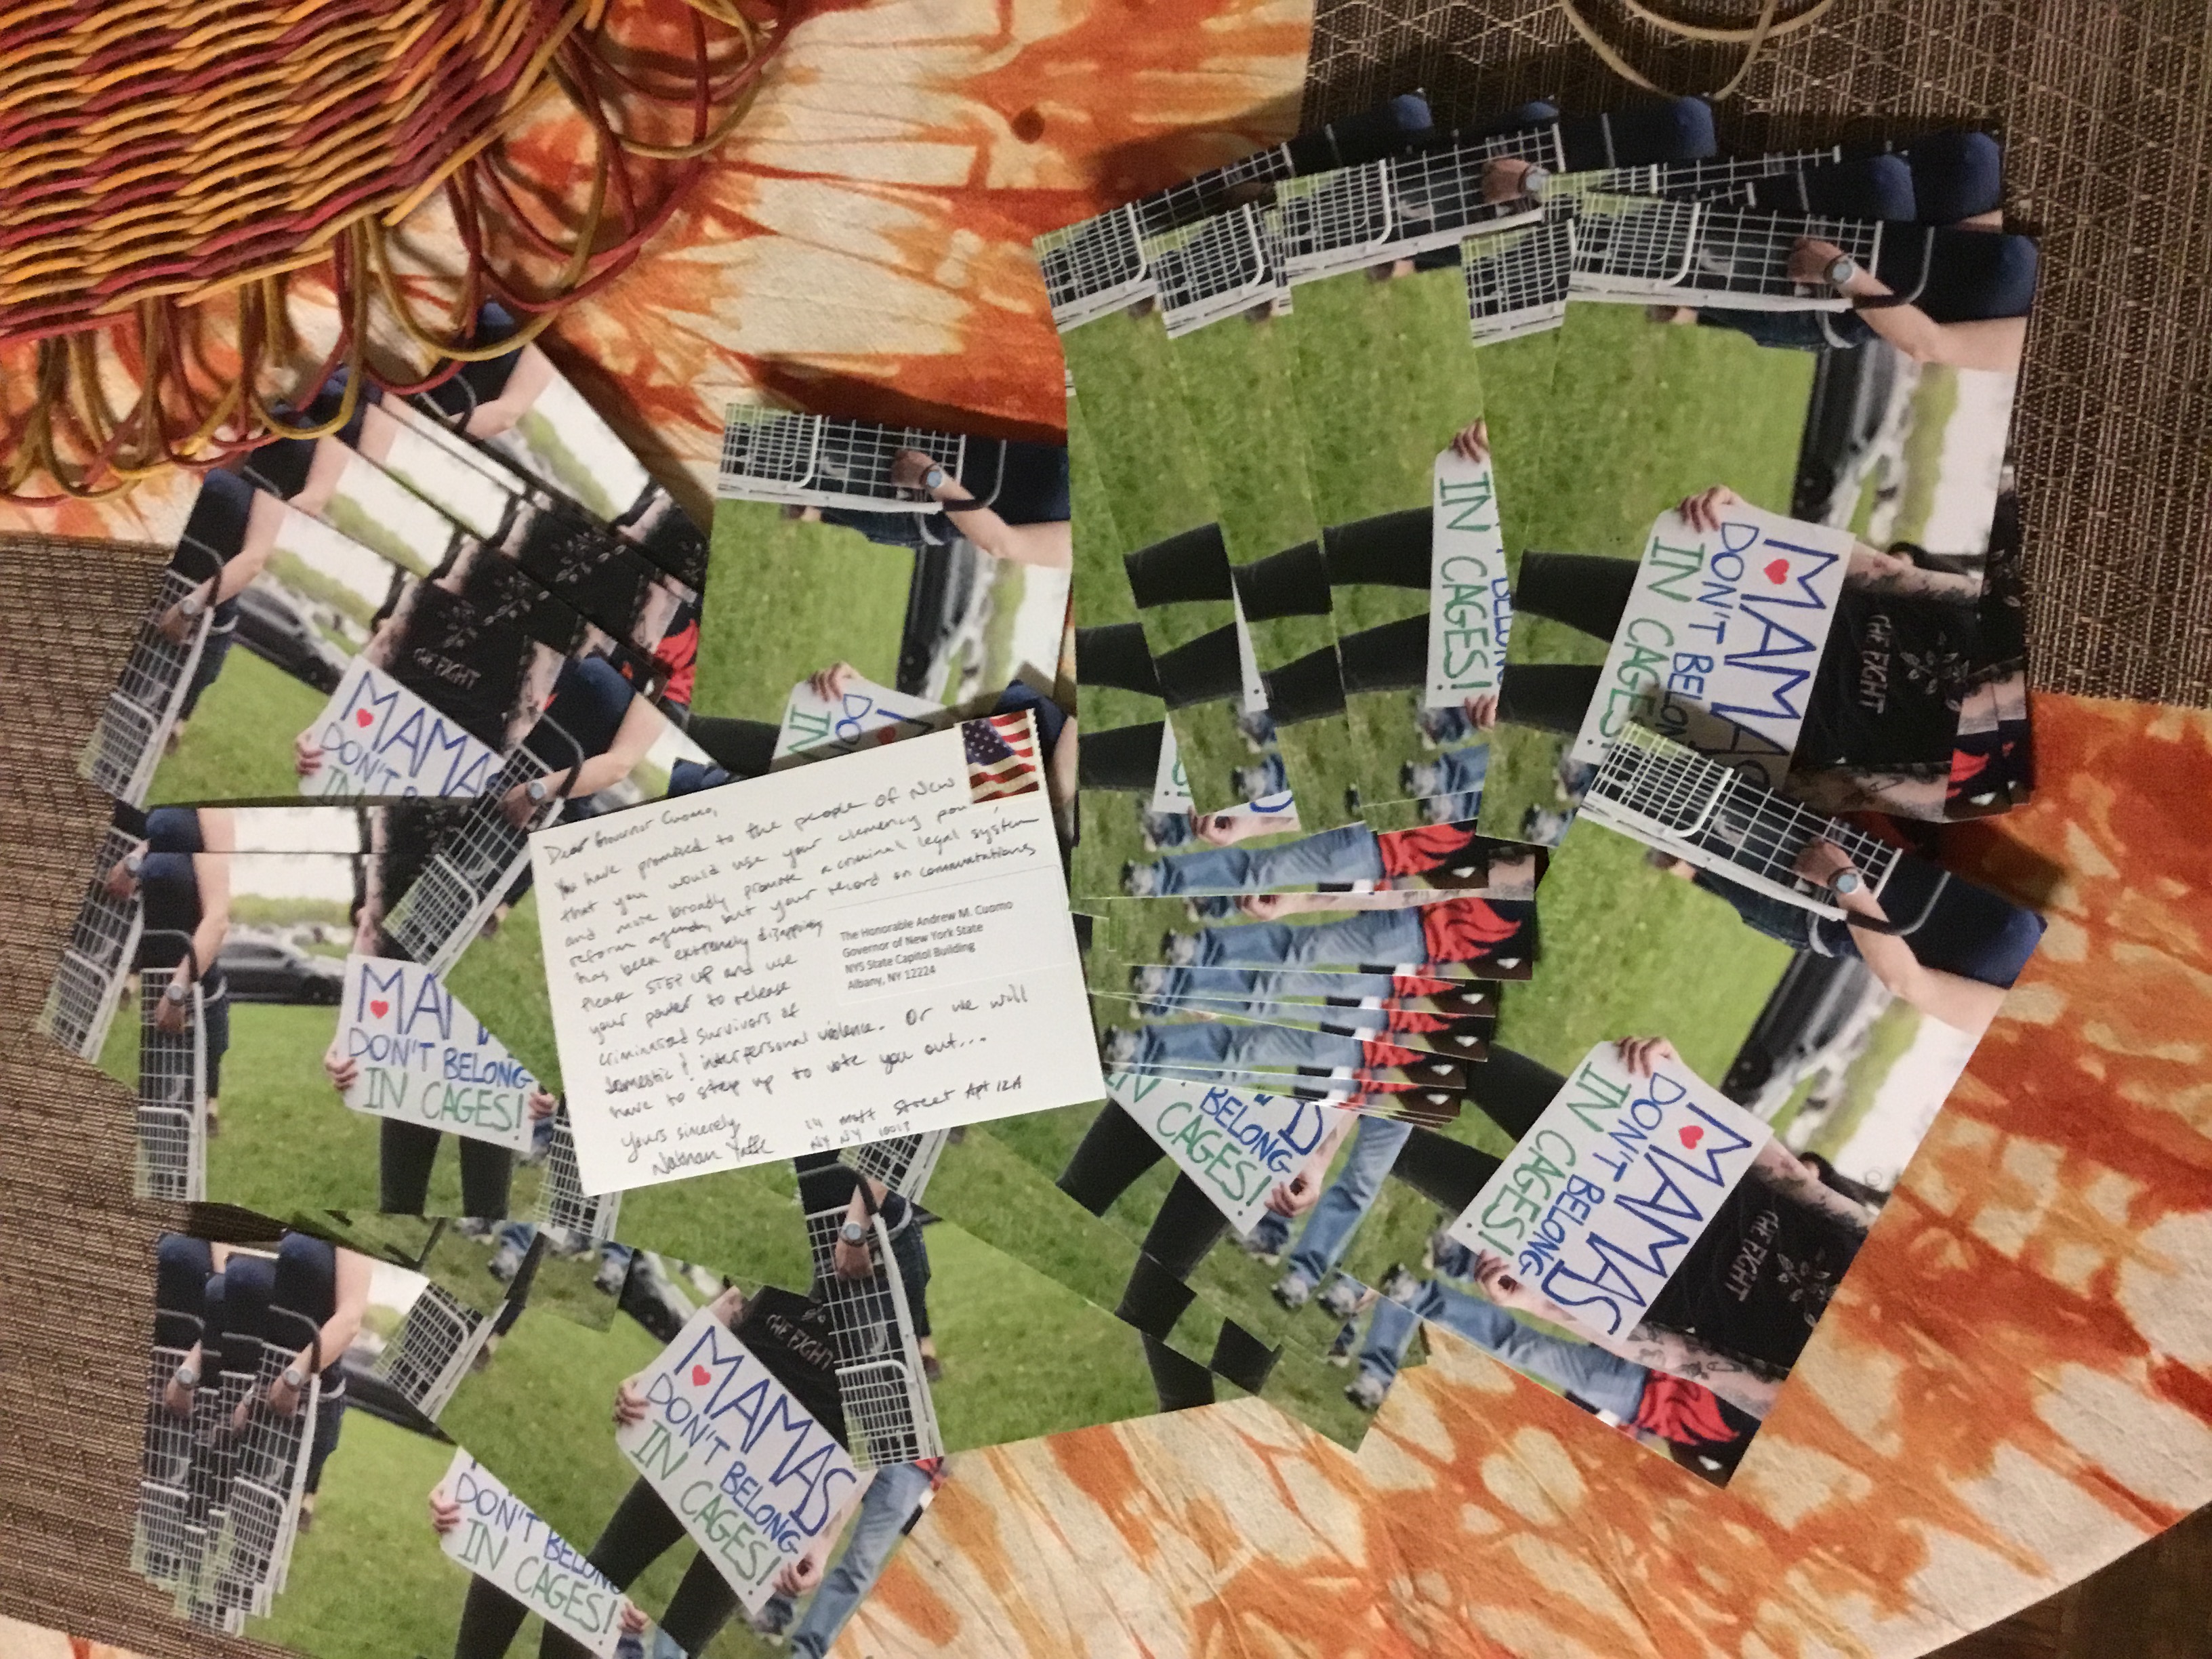 A picture of a large amount of survived and punished postcards in support of our campaign. Each postcard has art on the front including a person holding a sign saying: mamas don't belong in cages. One postcard is turned over to its back, with writing on it addressed to Governor Cuomo urging him to free survivors.